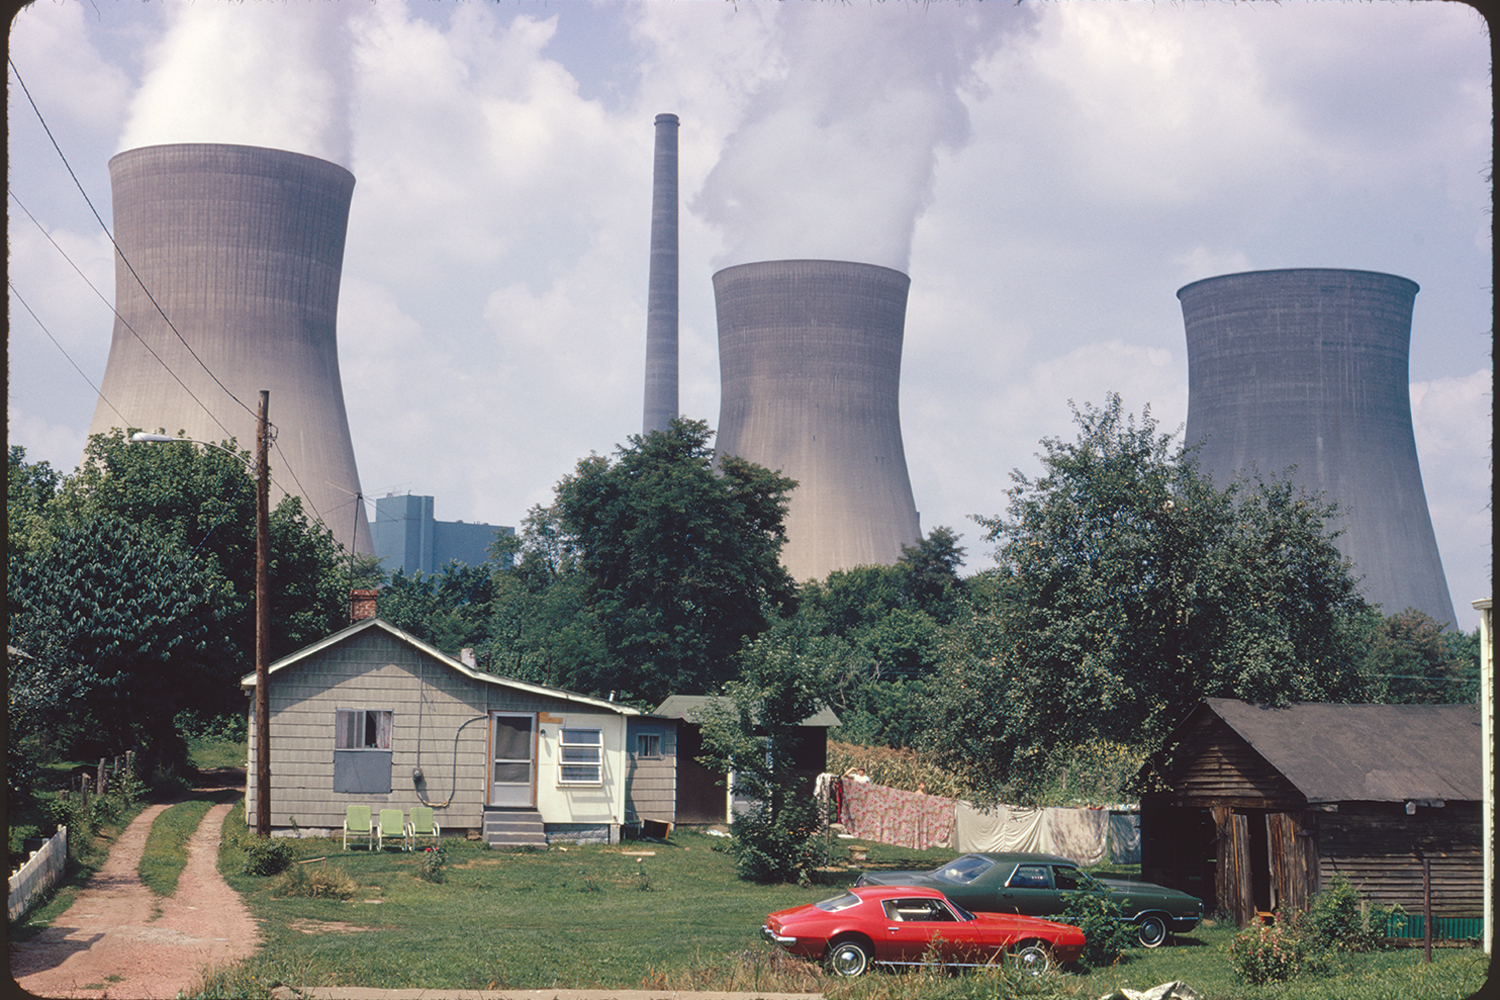 Water cooling towers of the John Amos Power Plant loom over Poca, WV, 1973.